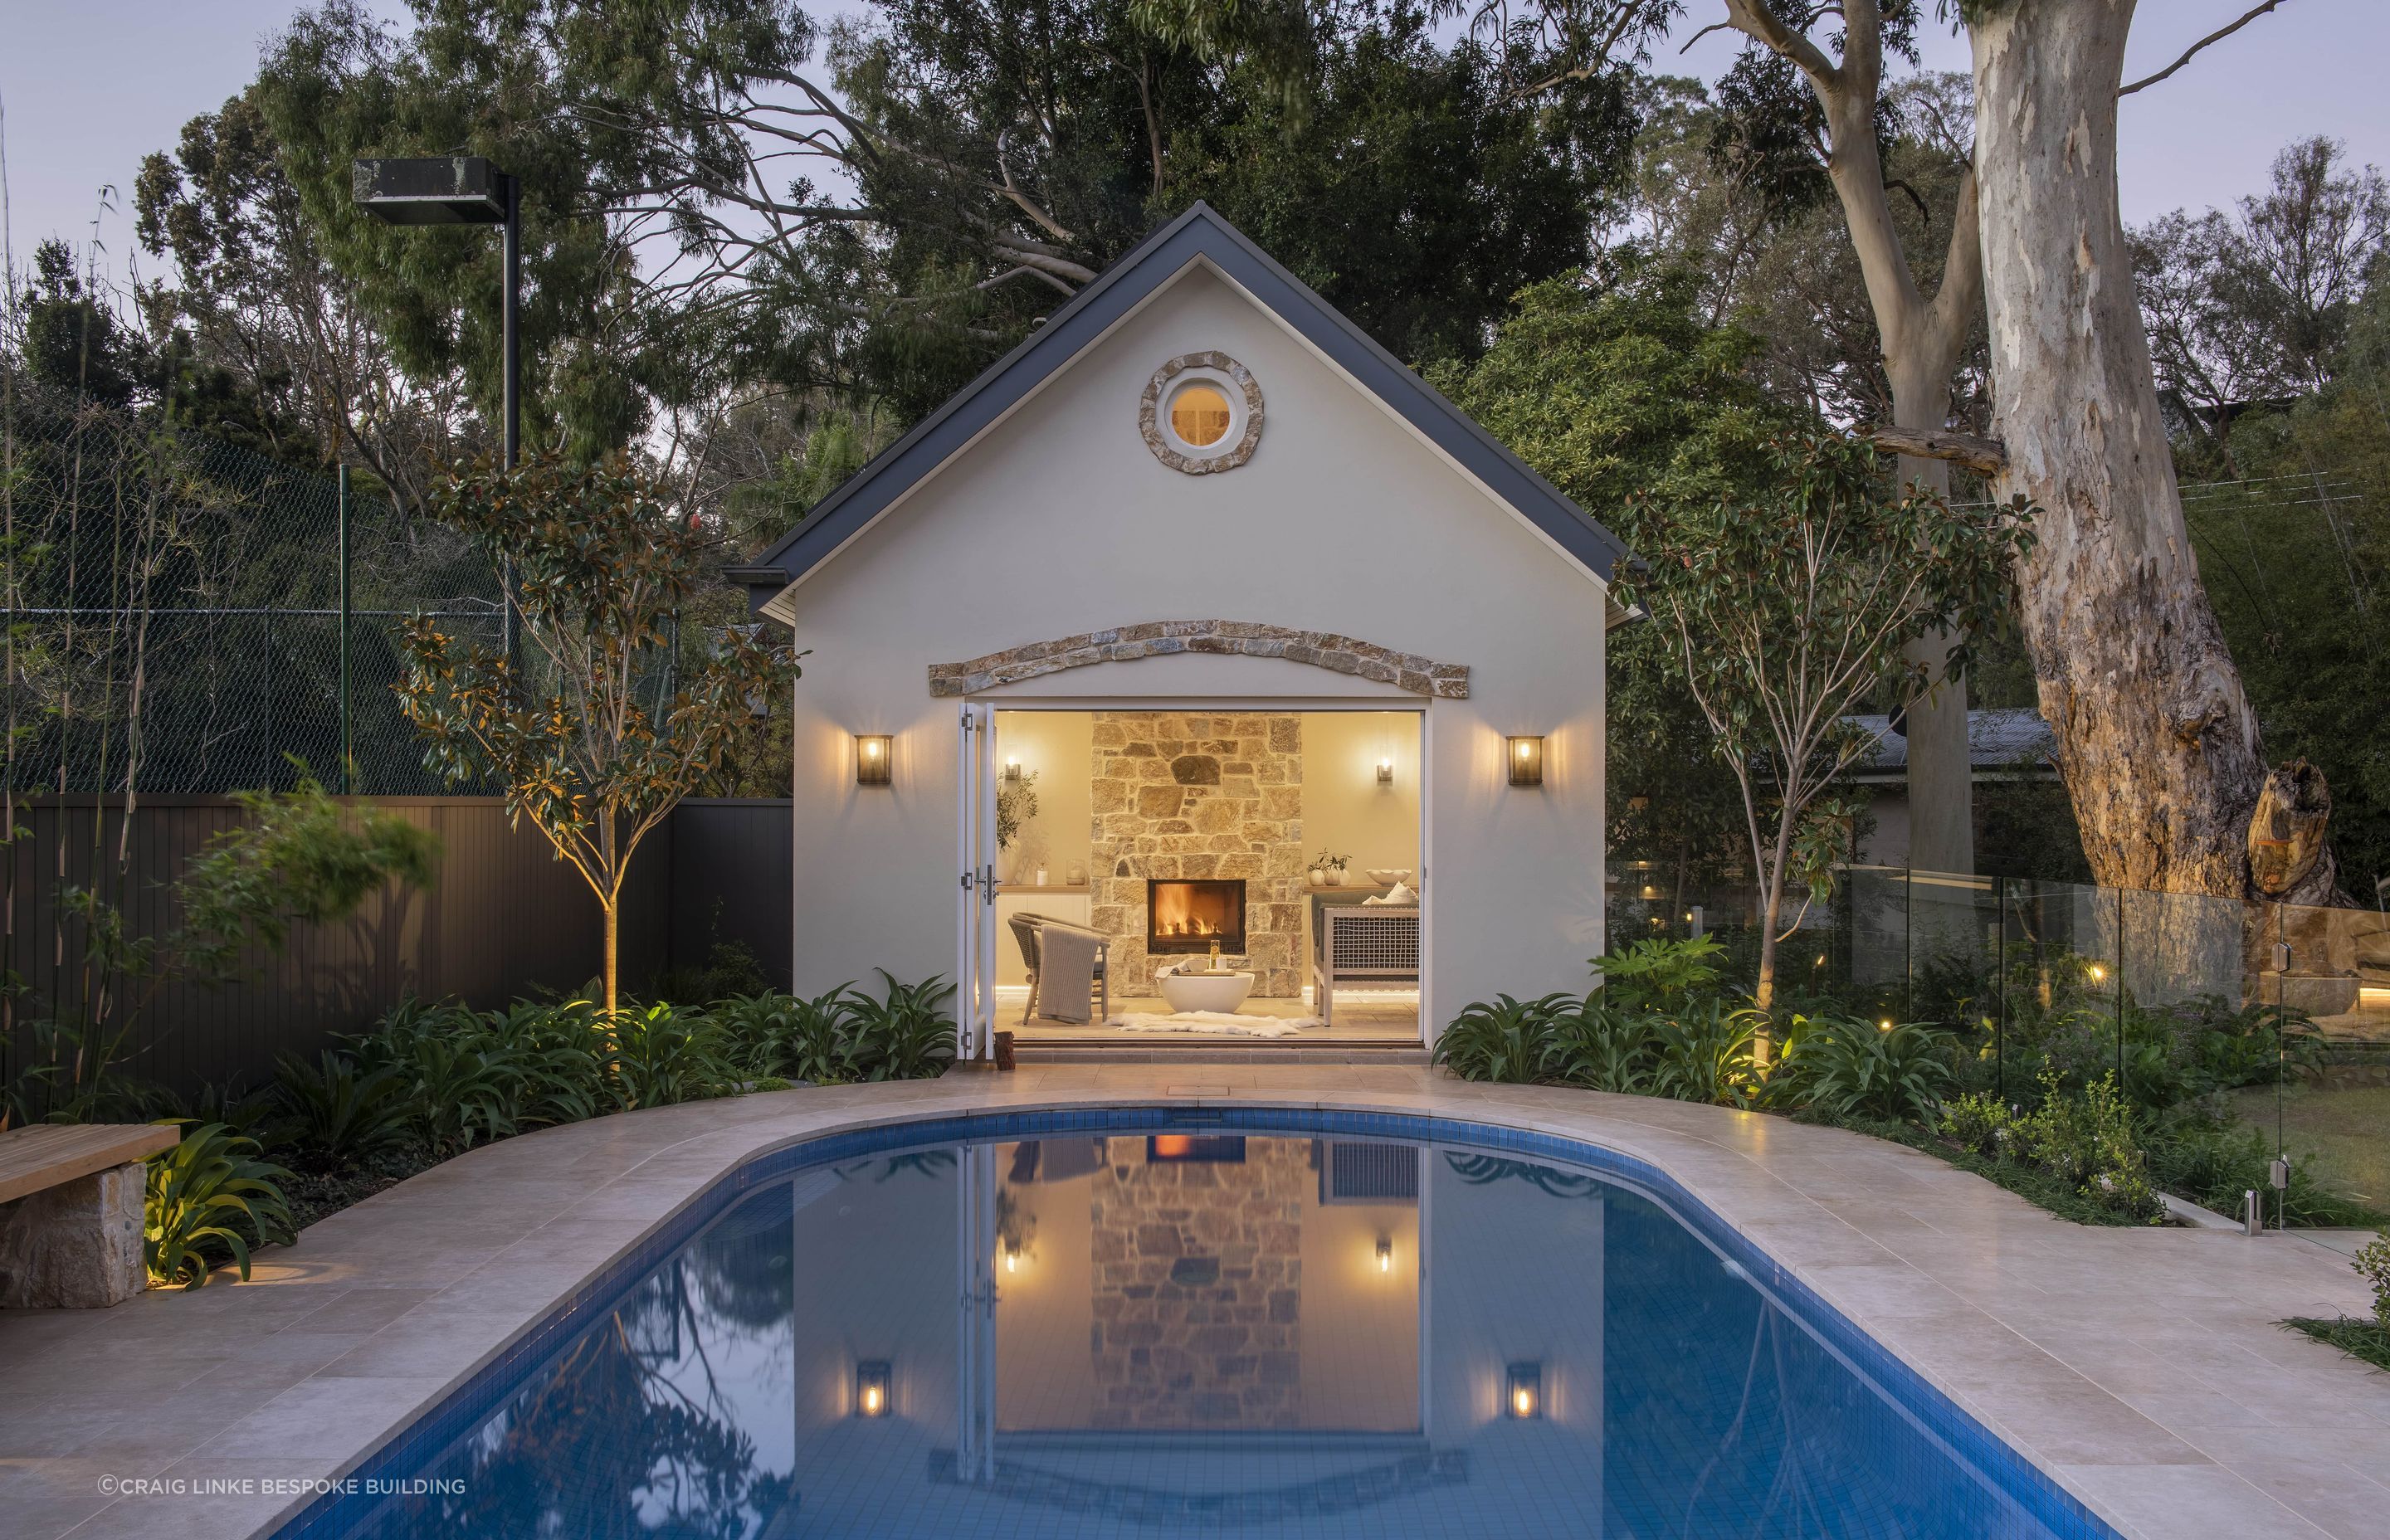 This outstanding Pavilion features strategically placed LED lighting that gives the entire pool area a special atmosphere. Featured project: The Pool Pavilion - Craig Linke Bespoke Building